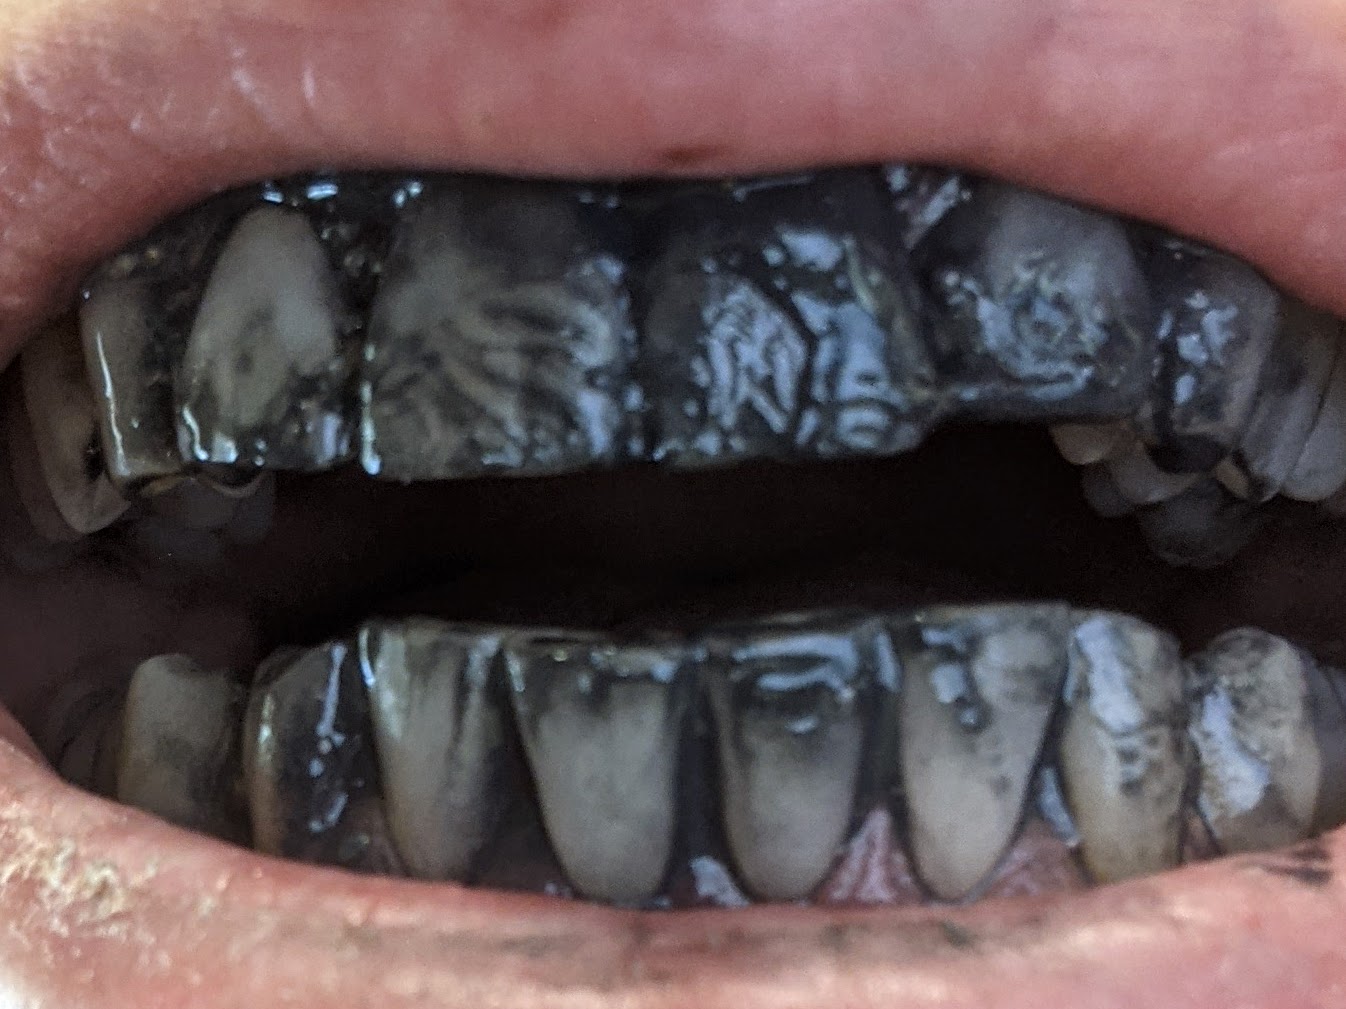 Photo of teeth with black charcoal toothpaste on them